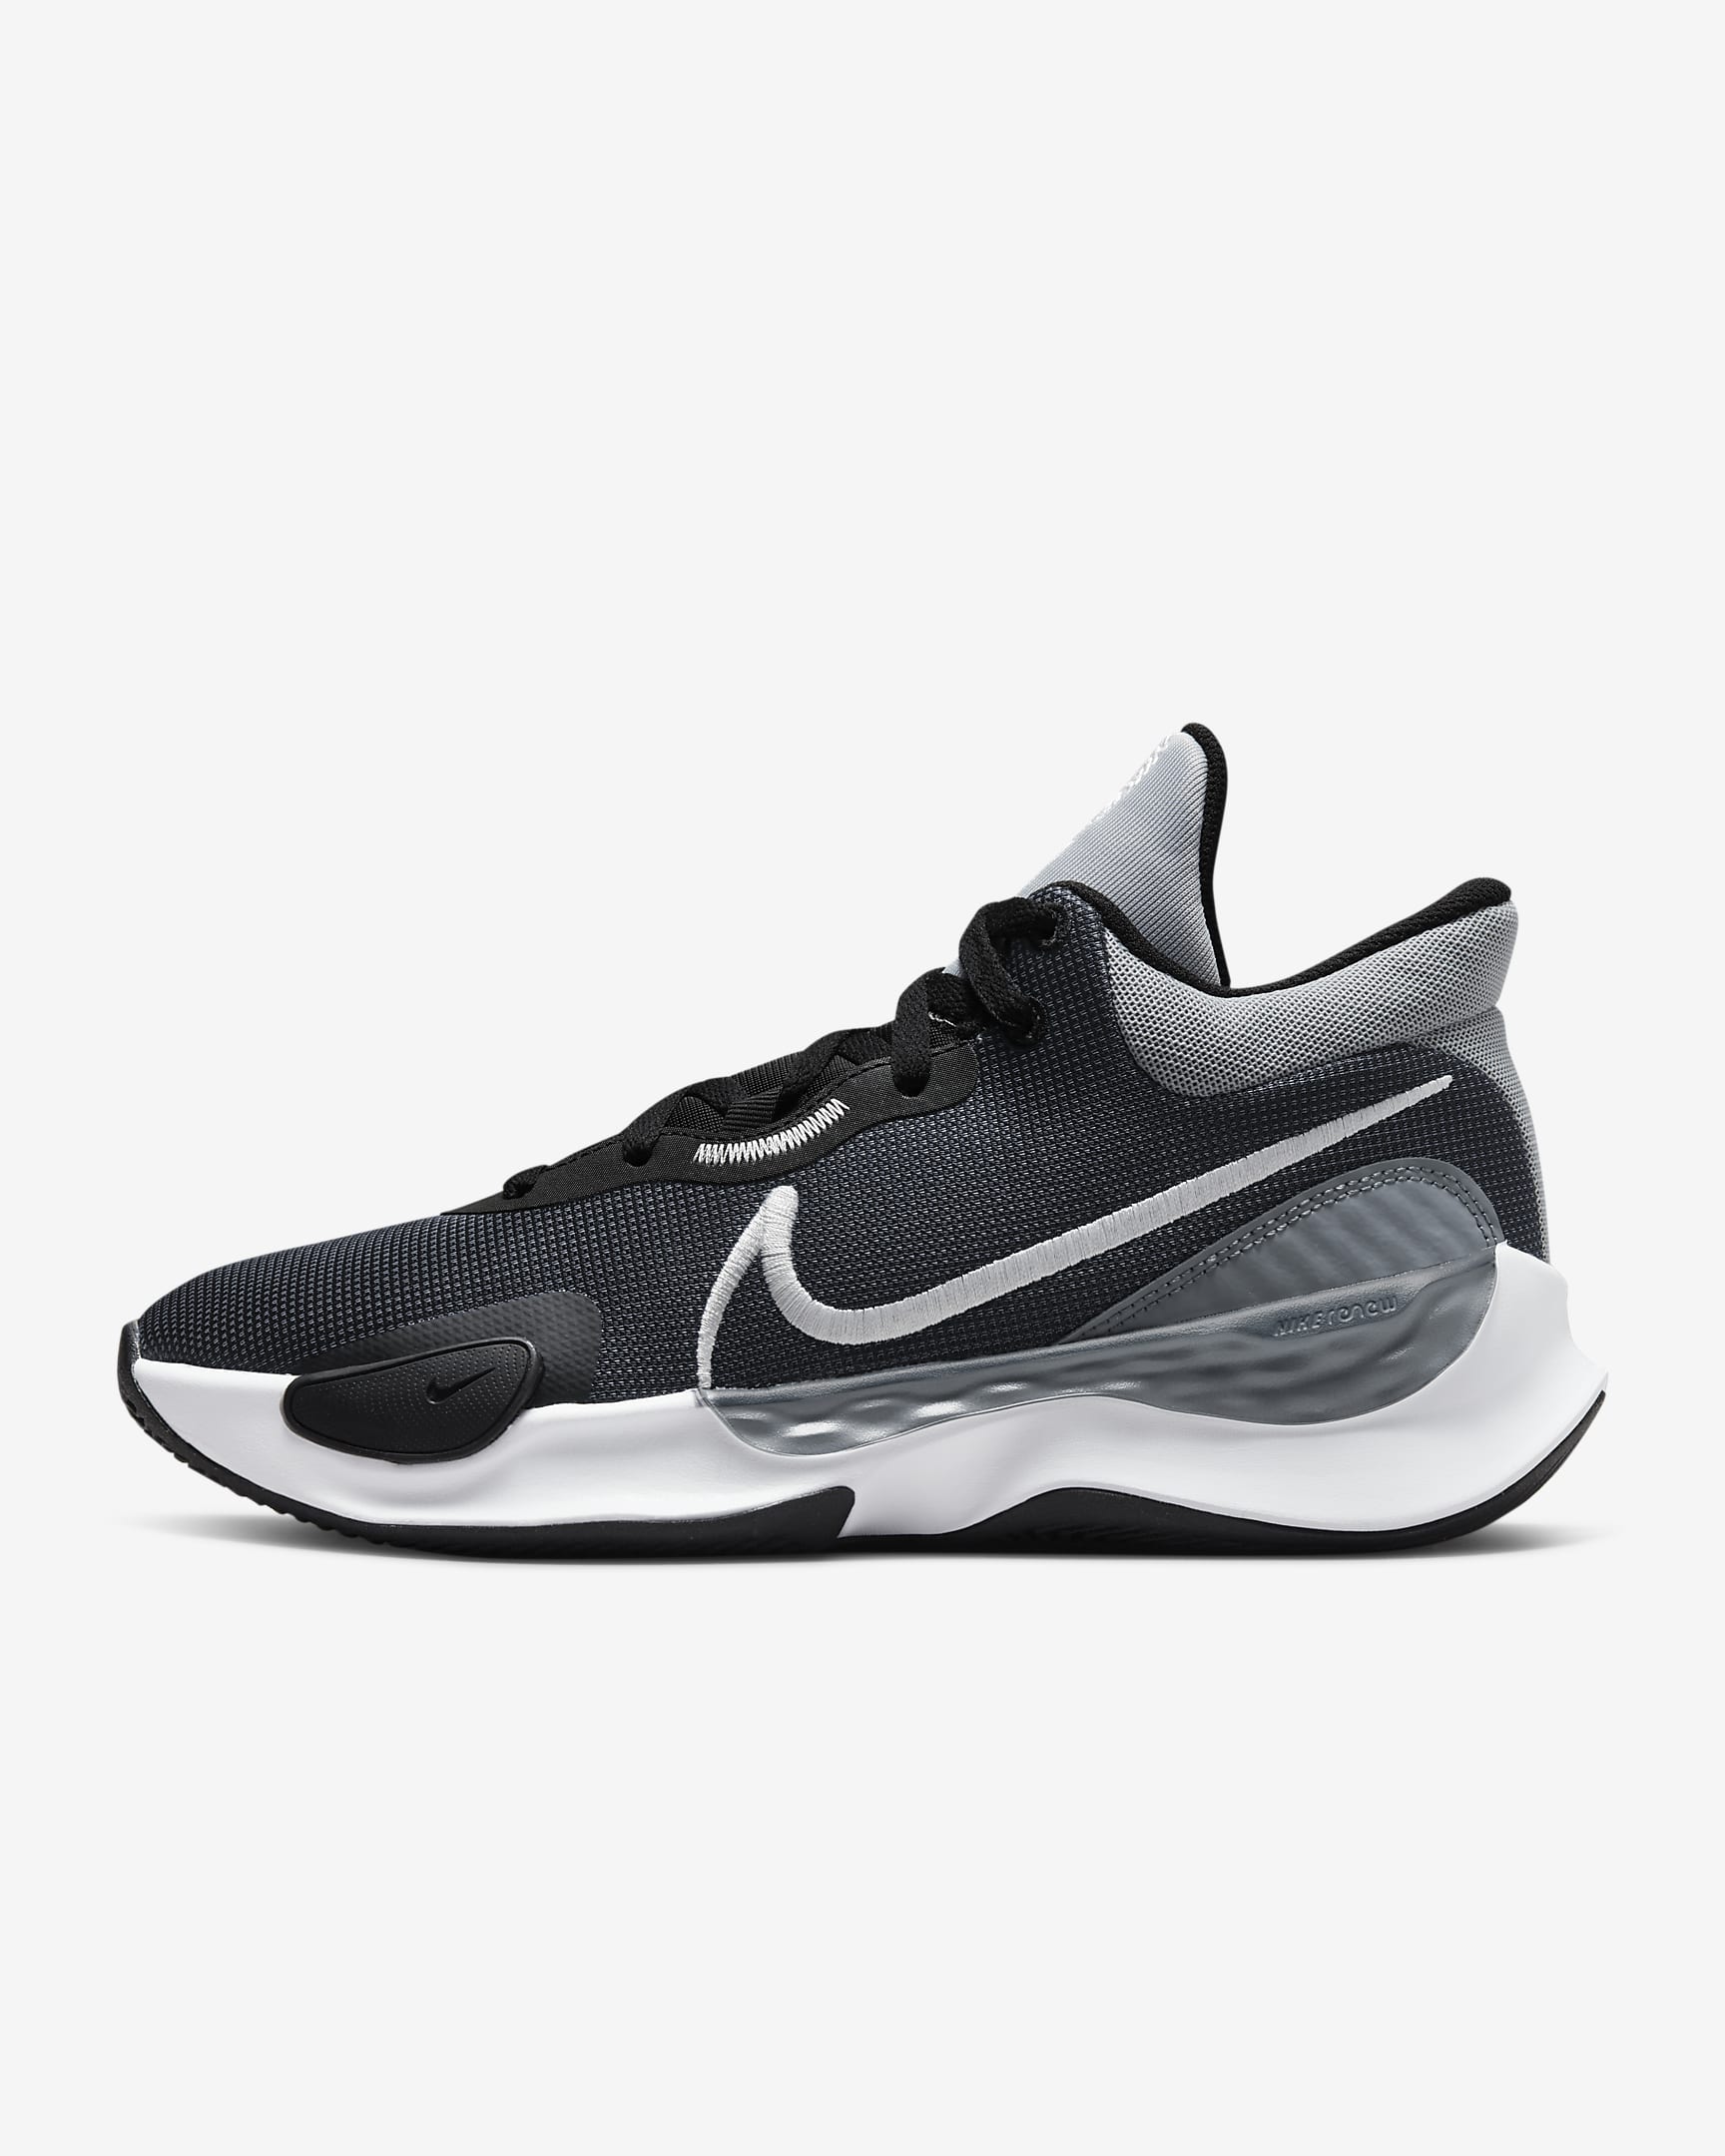 Nike Men's Elevate 3 Basketball Shoes (Black/Wolf Grey/Cool Grey/White) $51.98 + Free Shipping